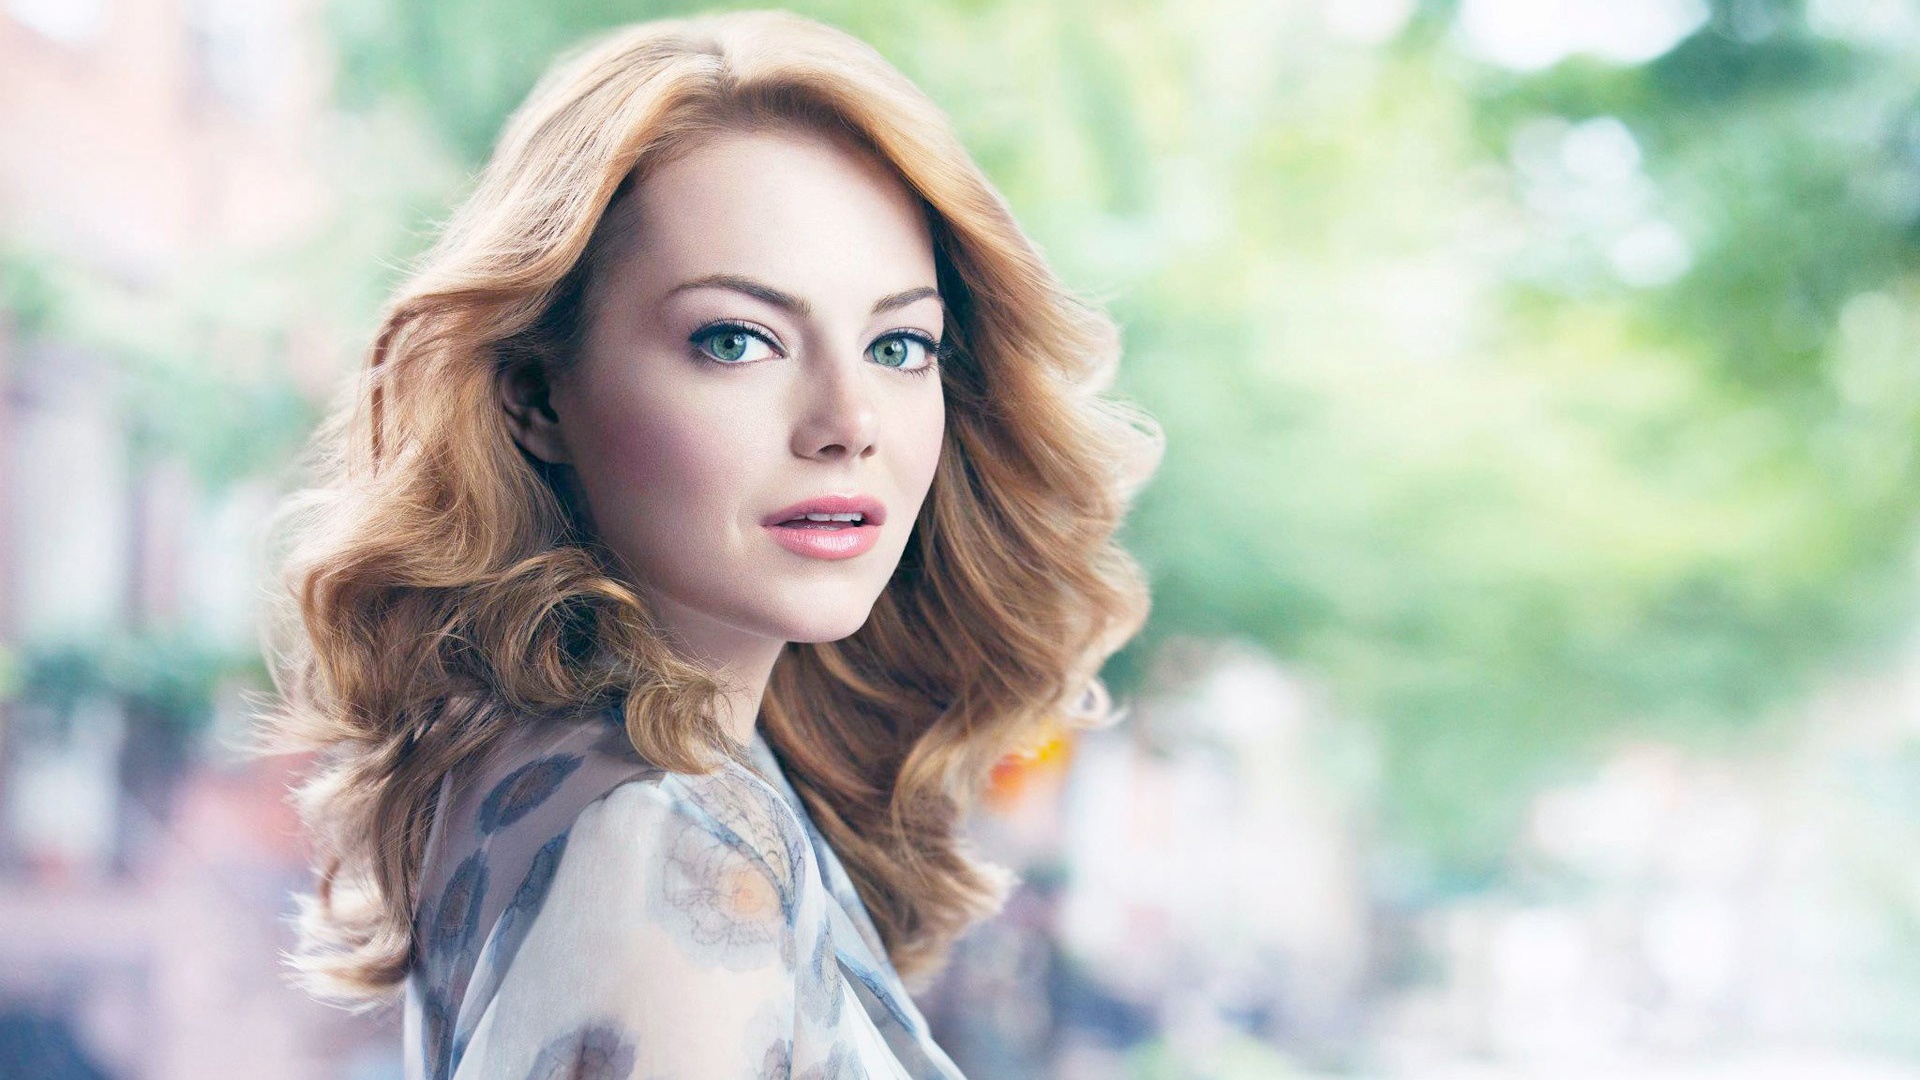 Free download Emma Stone wallpaper Archives 1920x1080 Wallpapers